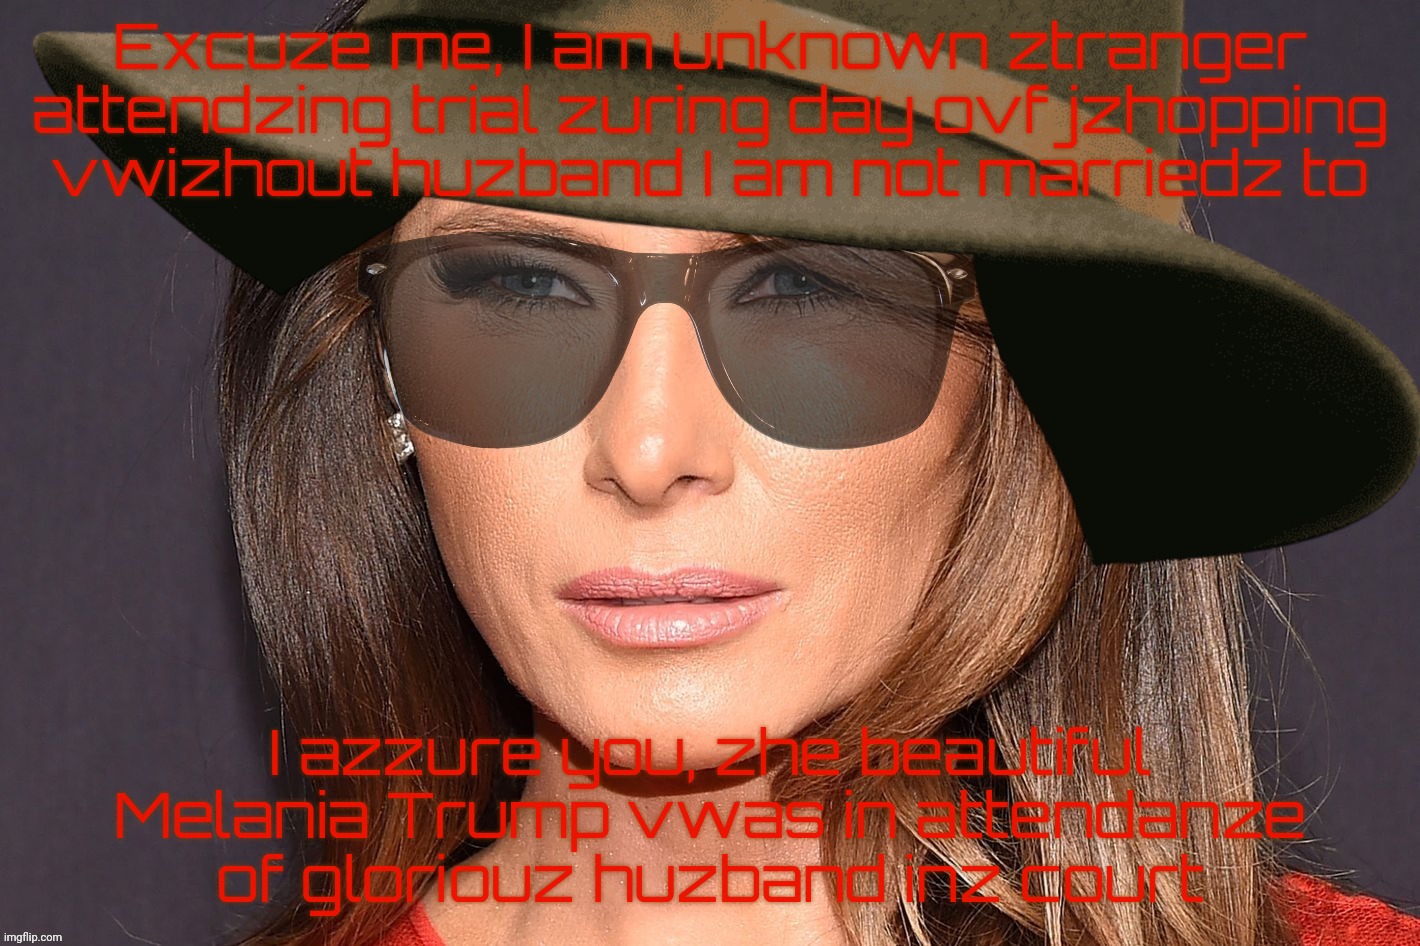 Melania Trump is not abandoned Donald Trump. This is not Melania. | Excuze me, I am unknown ztranger attendzing trial zuring day ovf jzhopping
vwizhout huzband I am not marriedz to I azzure you, zhe beautiful | image tagged in melania trump | made w/ Imgflip meme maker